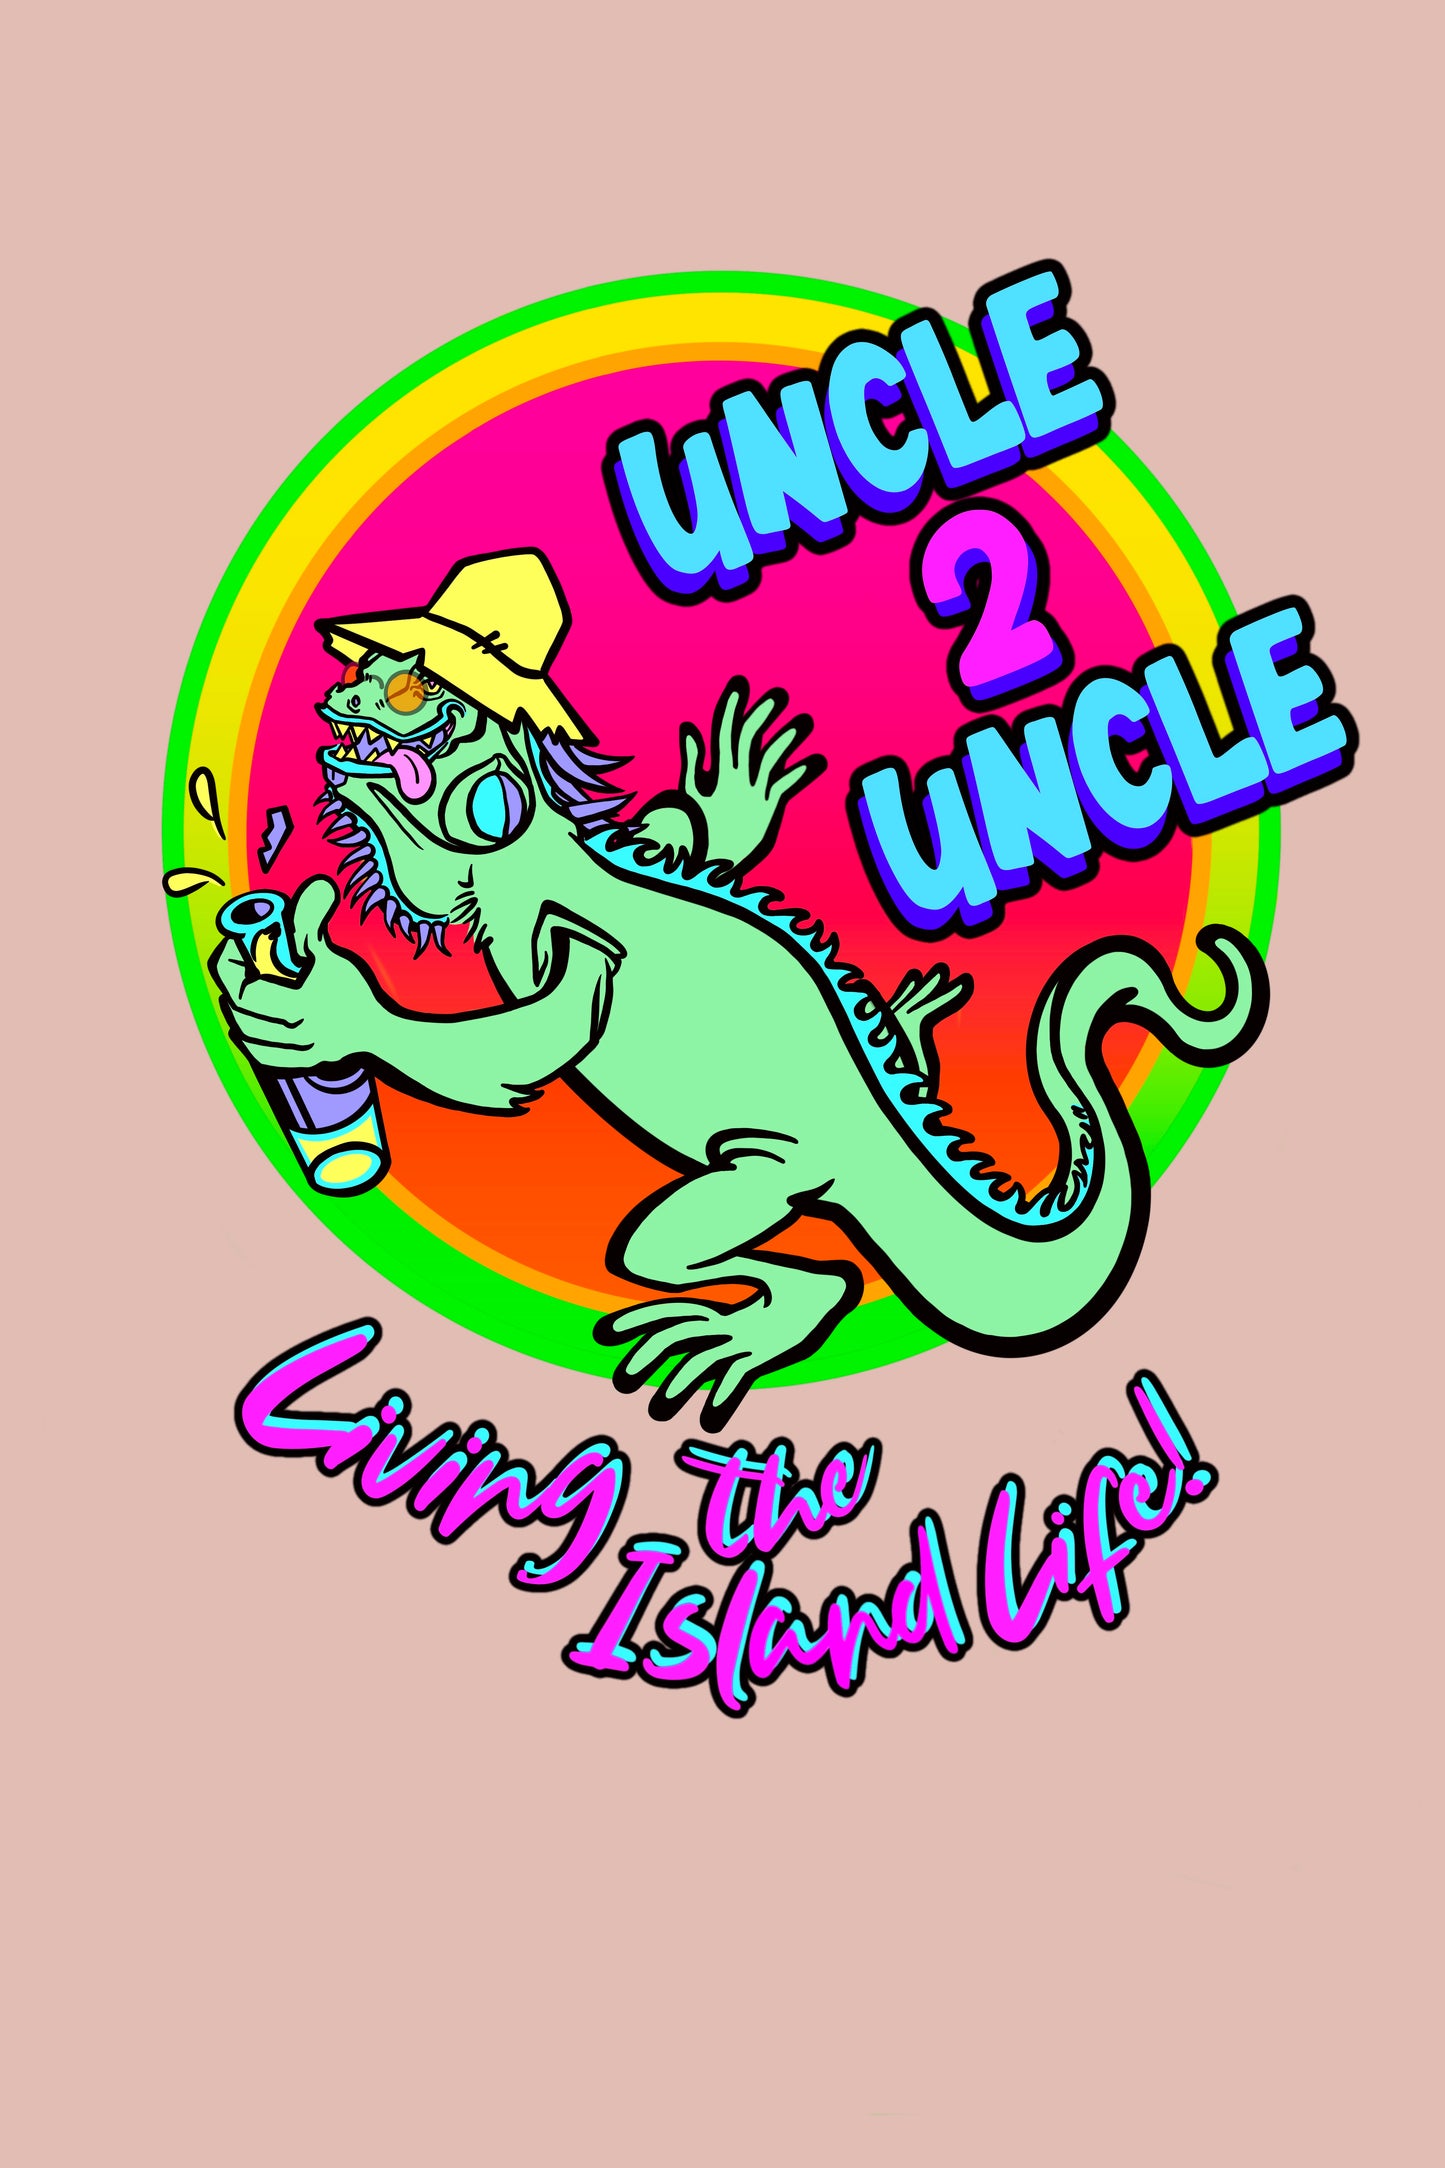 Uncle 2 Uncle - Island Life Print